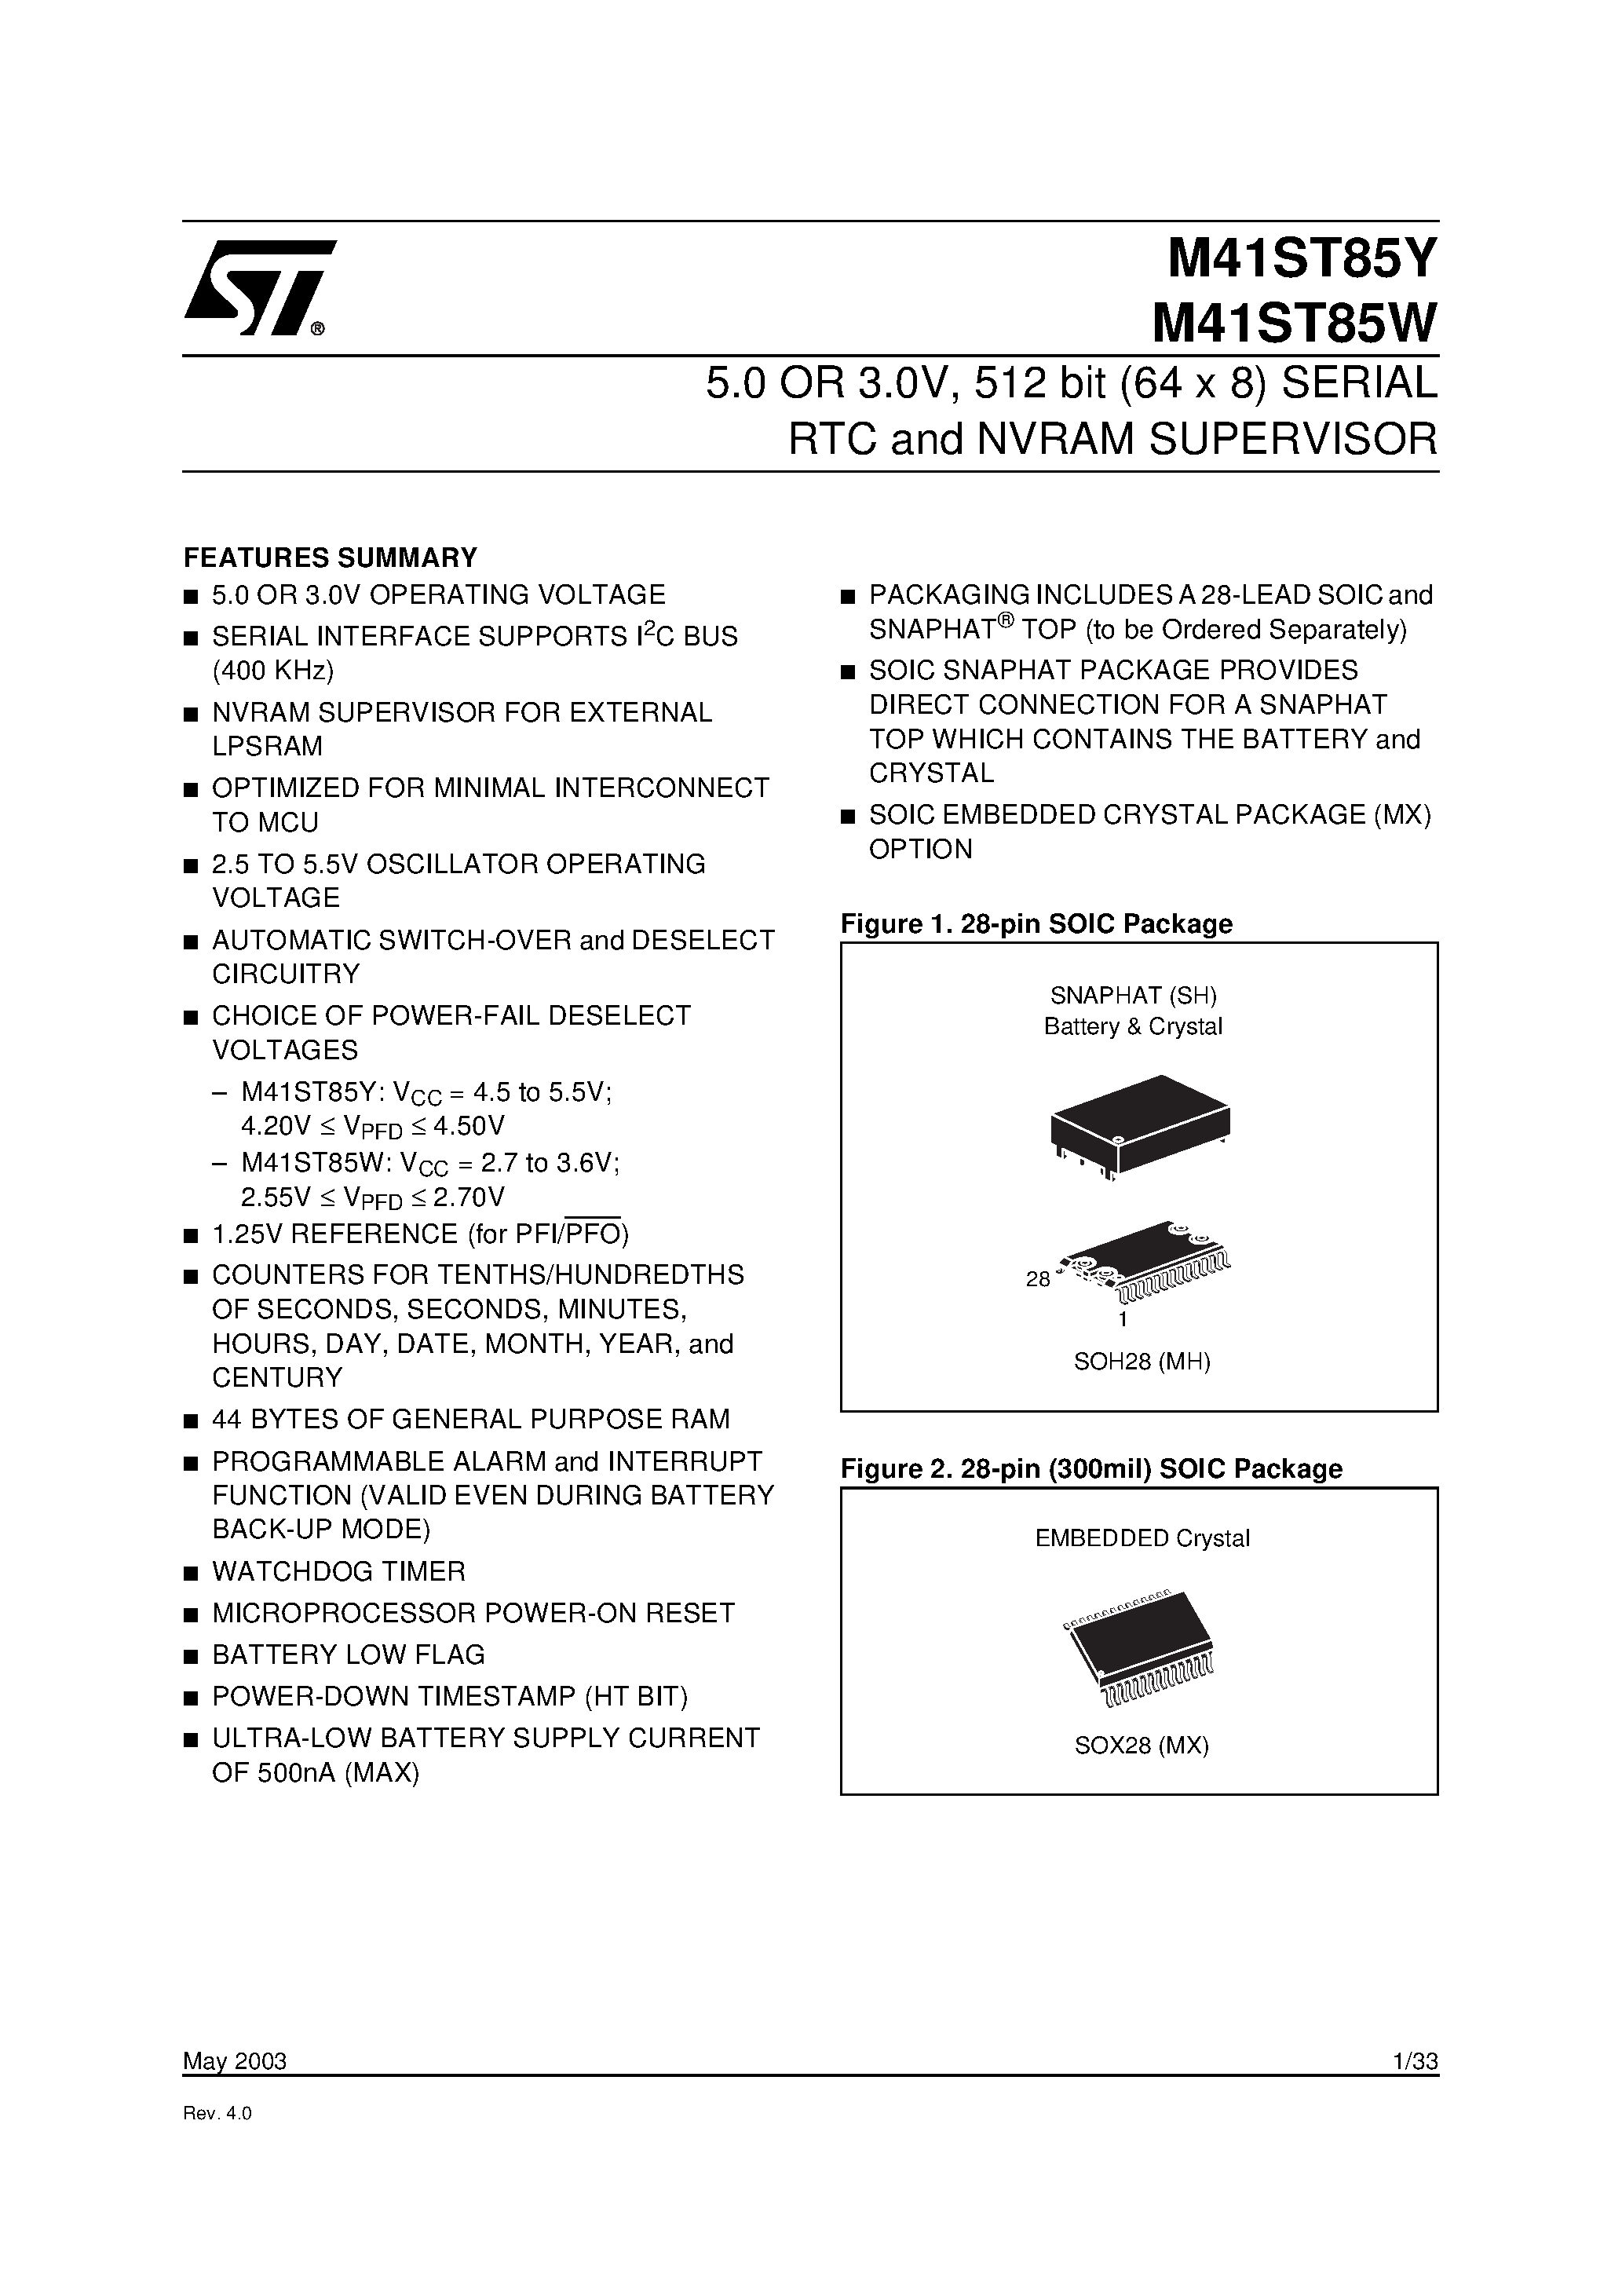 Datasheet M41ST85W - 5.0 OR 3.0V / 512 bit 64 x 8 SERIAL RTC and NVRAM SUPERVISOR page 1